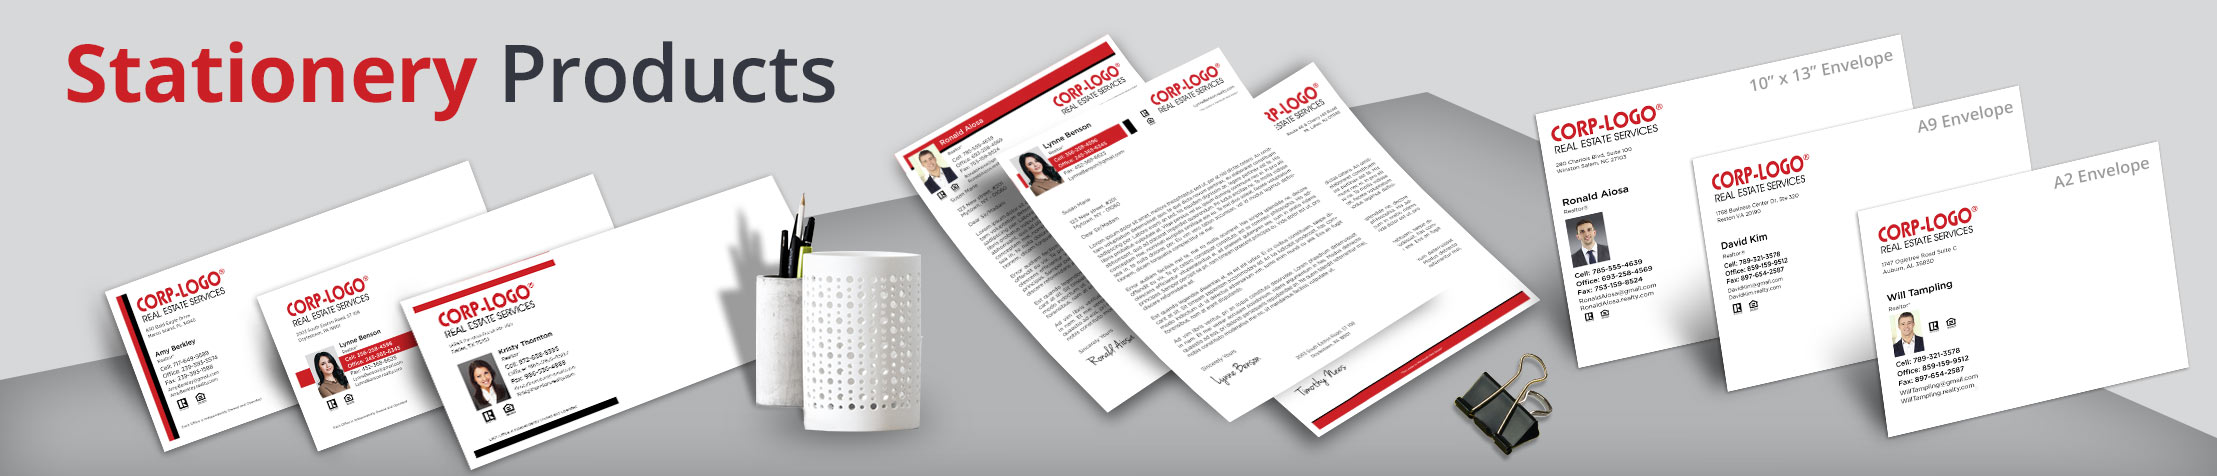 Crye Leike Real Estate Stationery Products - Custom Letterhead & Envelopes Stationery Products for Realtors | BestPrintBuy.com